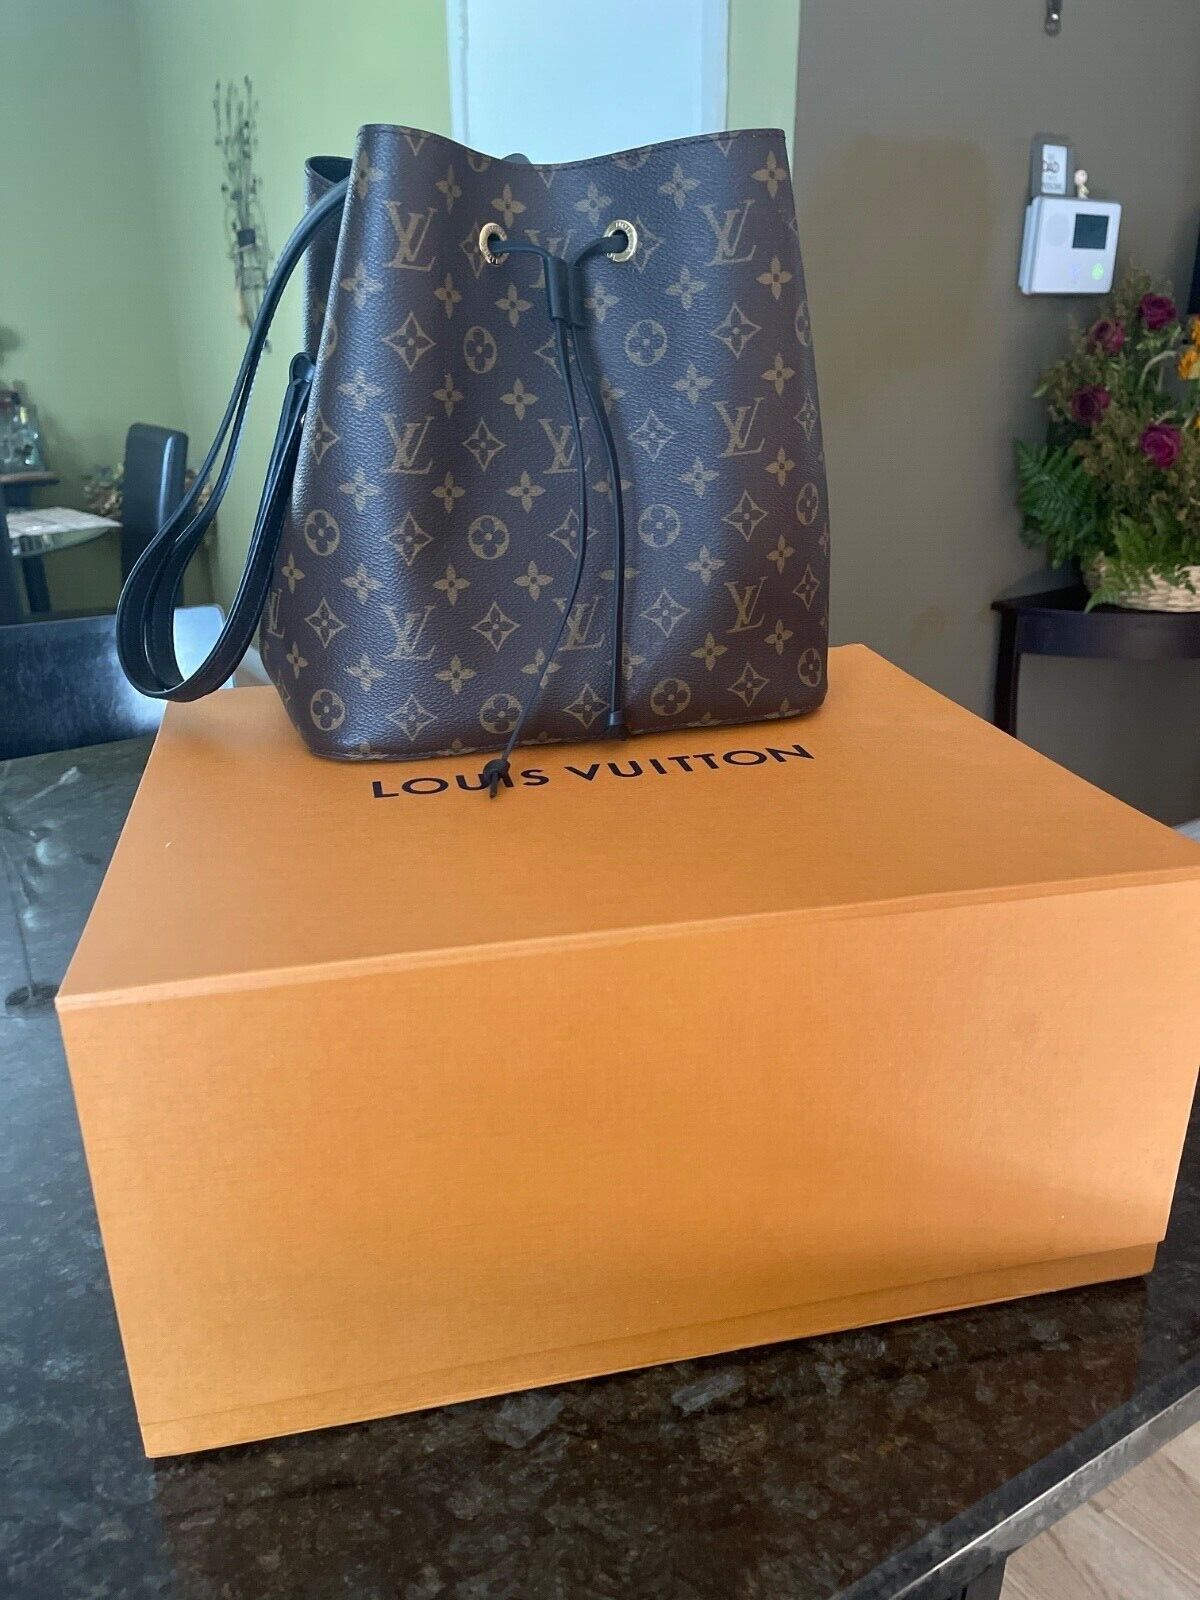 Pre-owned used louis vuitton - Gem